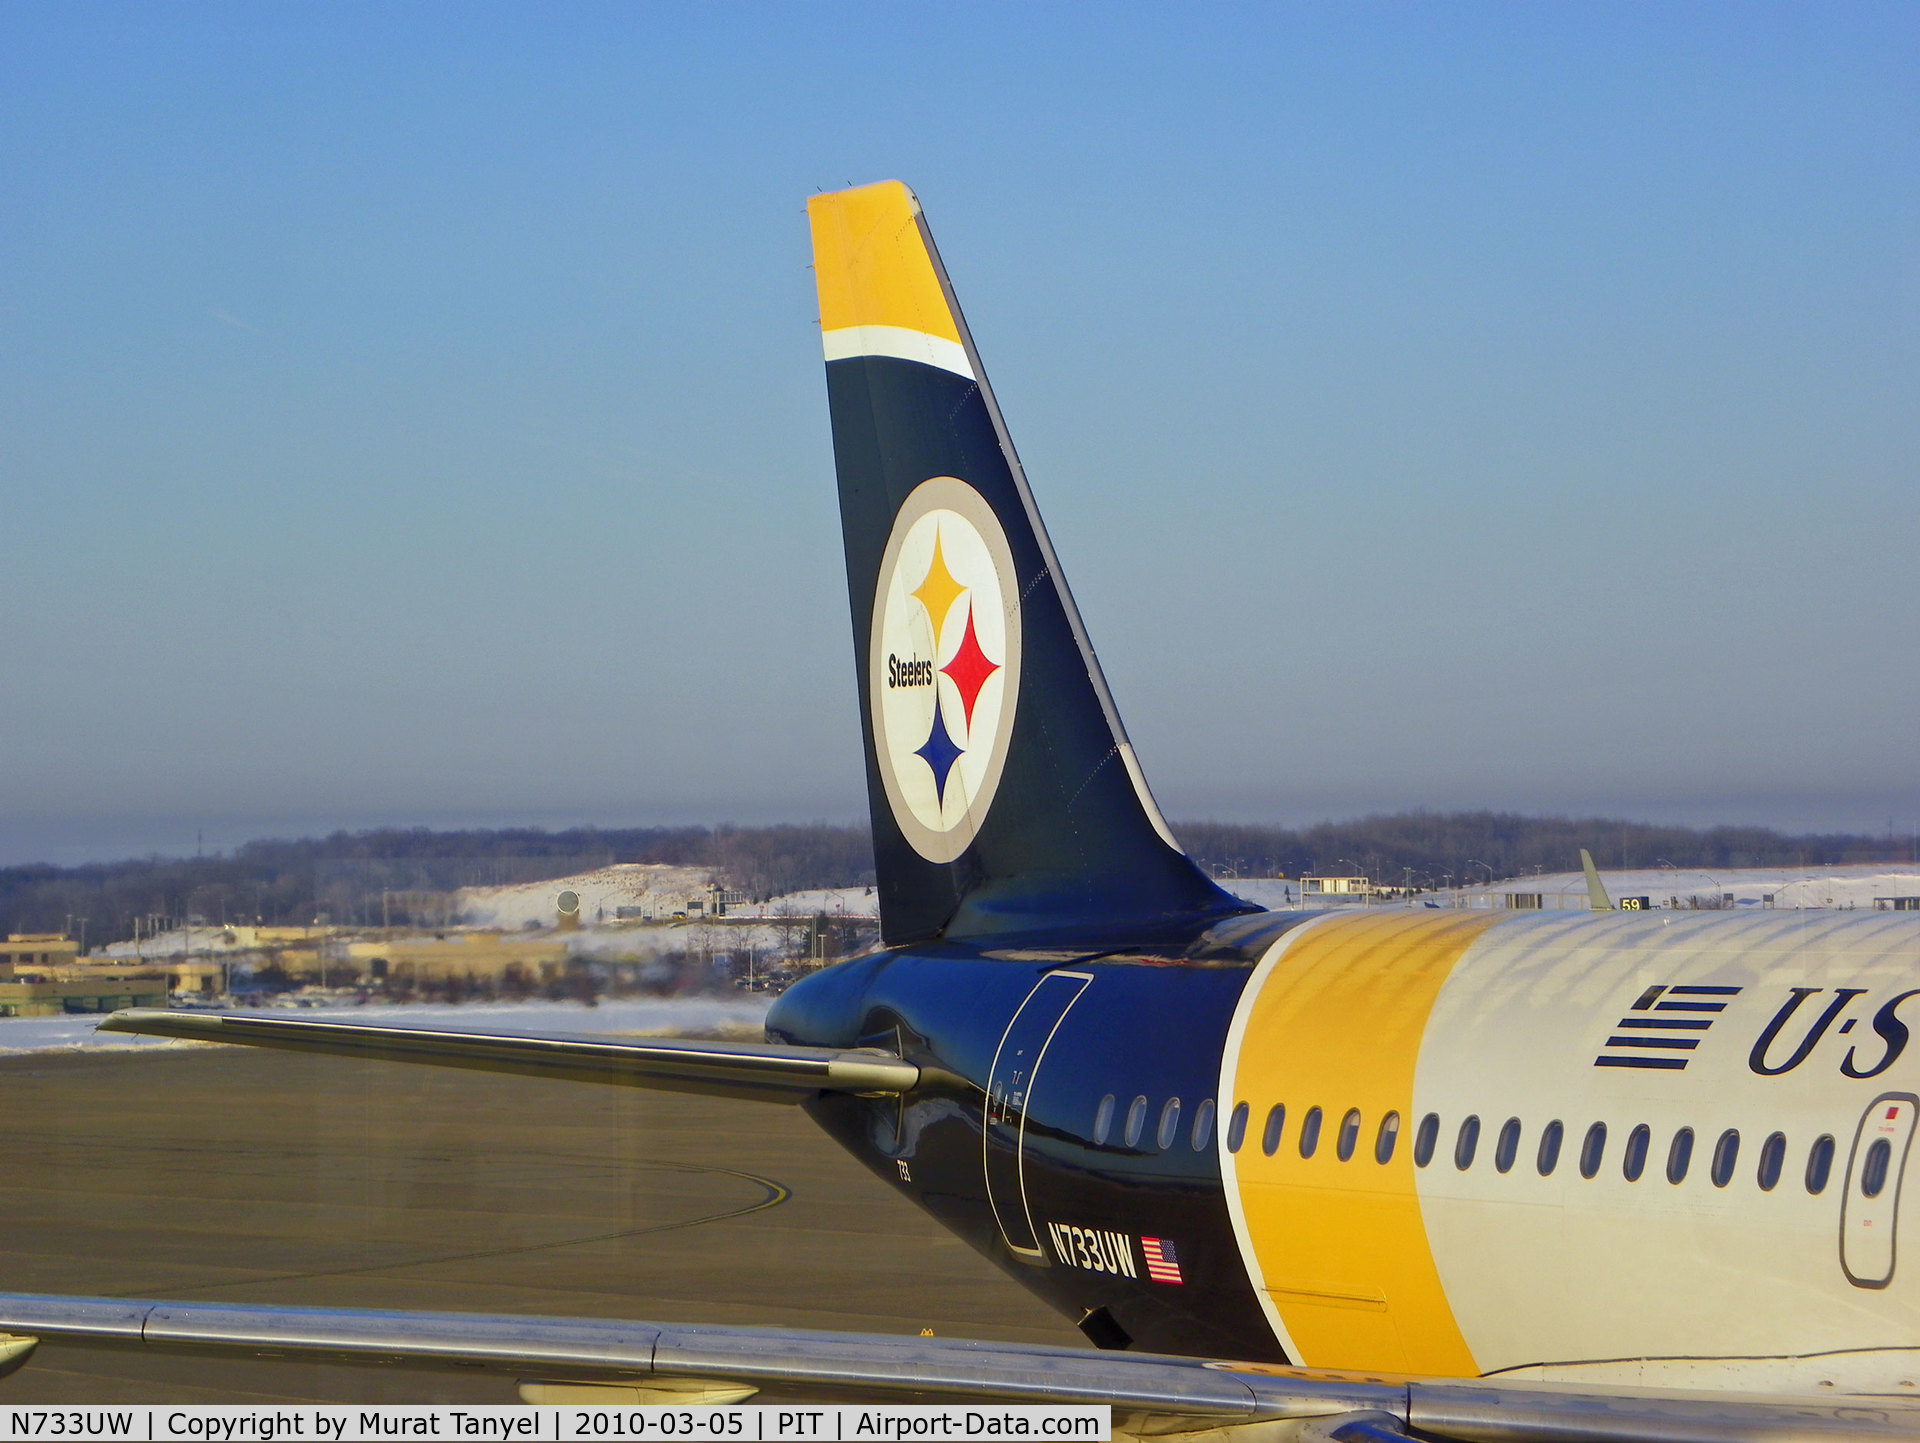 N733UW, 2000 Airbus A319-112 C/N 1205, The tail section, parked at Pittsburgh International Airport